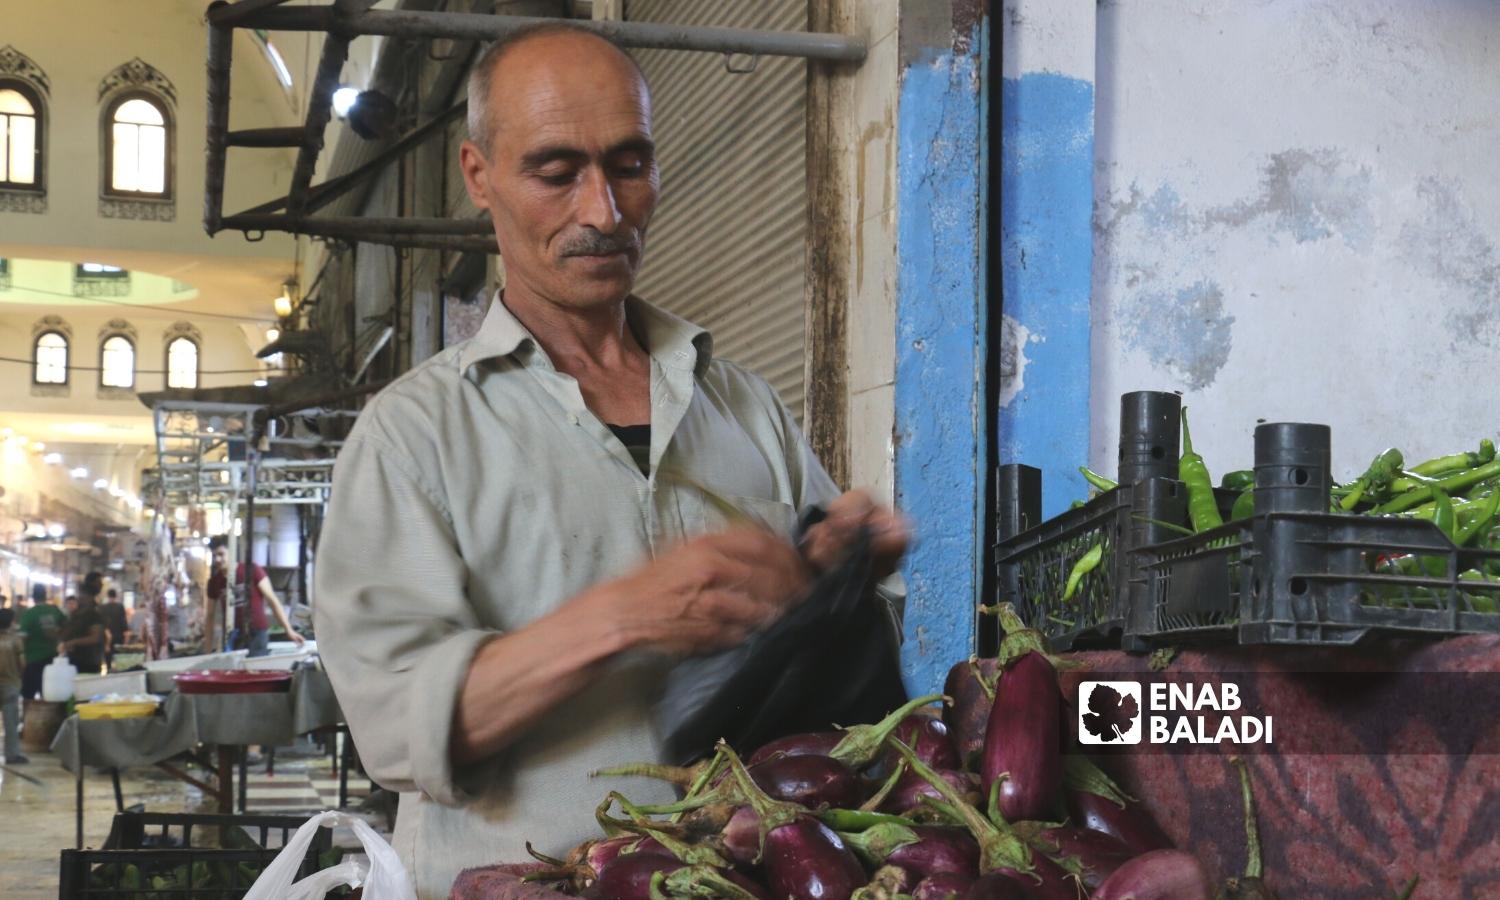 A man buys vegetables in the covered market of Azaz city in Aleppo’s northern countryside - 02 September 2022 (Enab Baladi/Dayan Junpaz)
